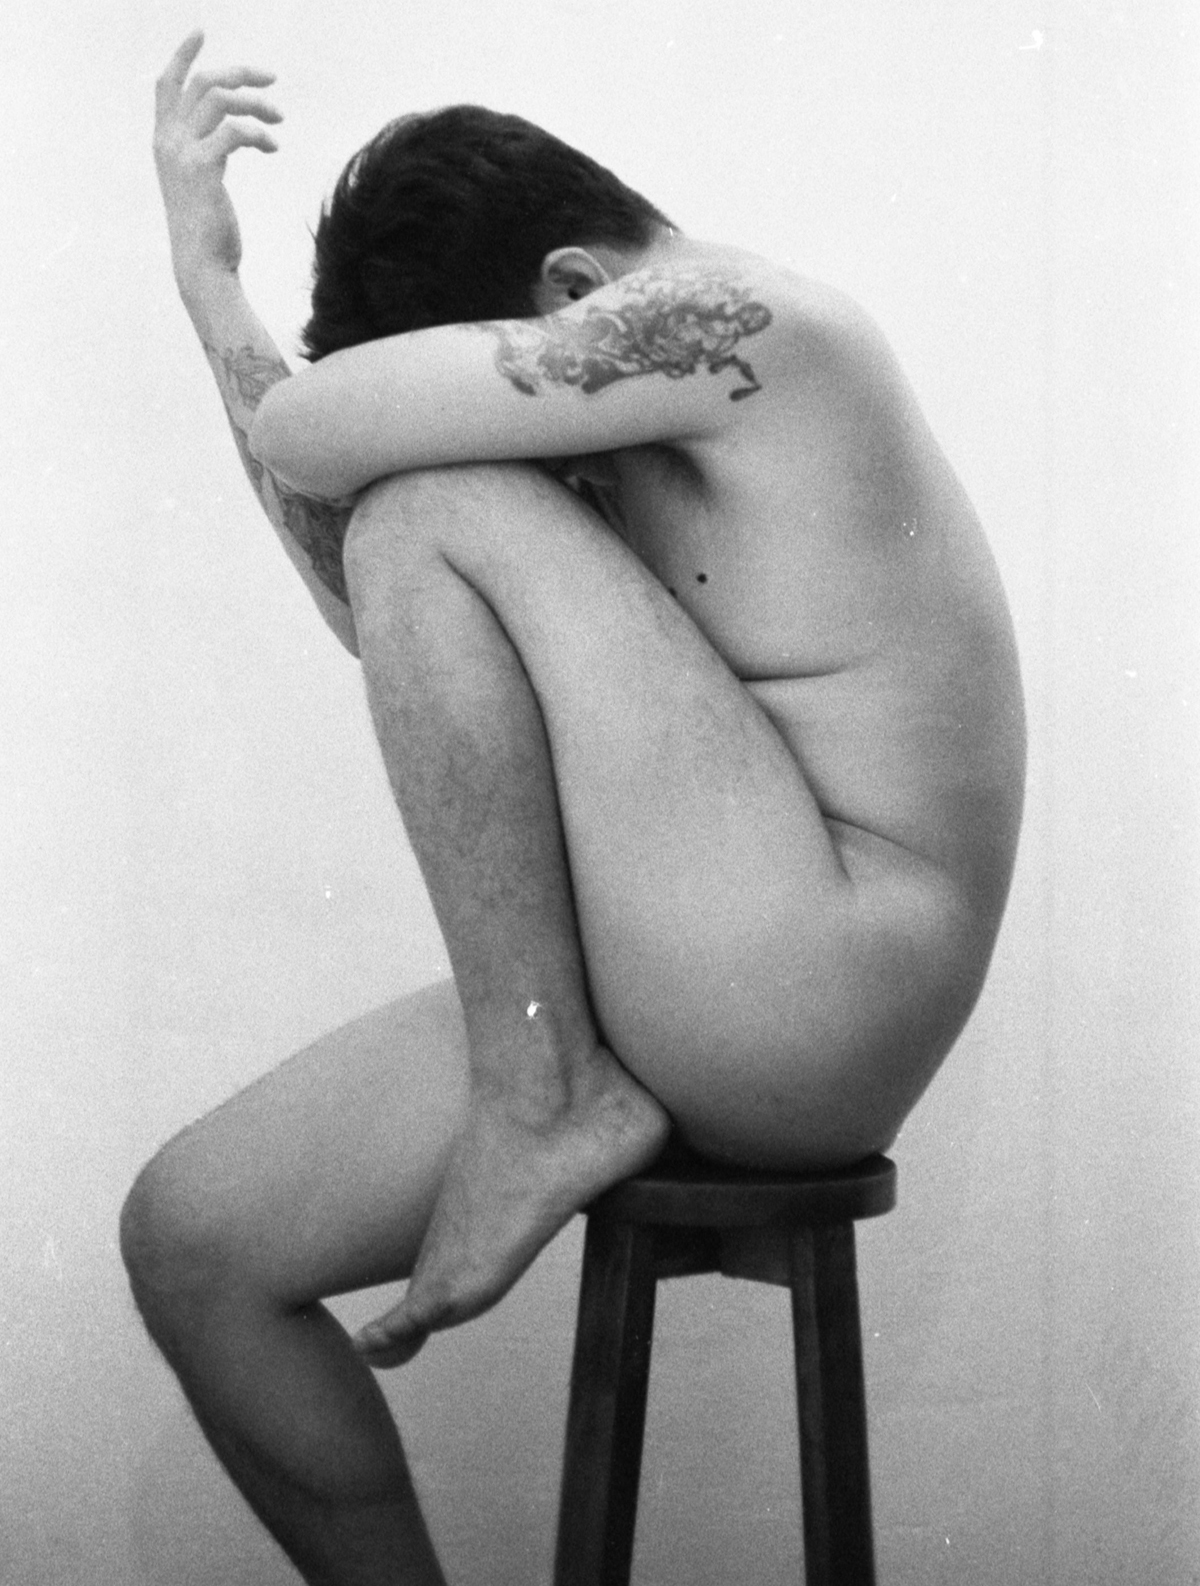 Ju Astronomo And Joper Ofrasio Photograph Each Other Using A film Camera With Results That Are Honest And Uncensored.